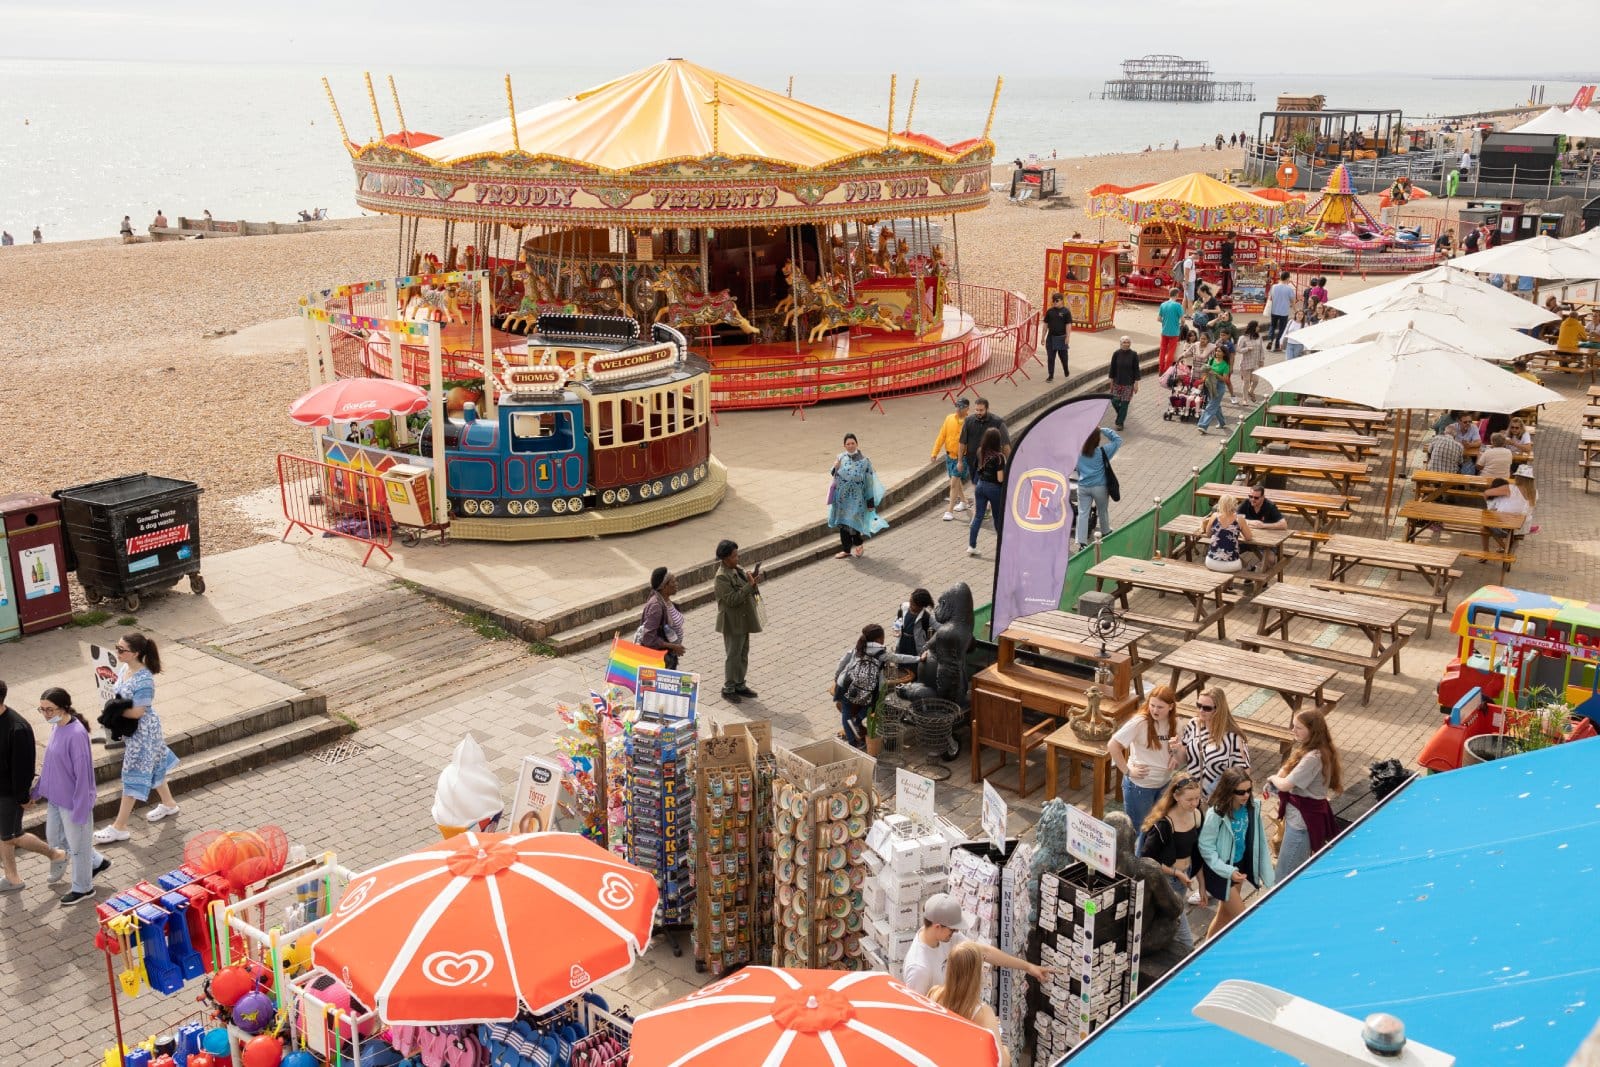 Image Credit: Shutterstock / raymond orton <p>Home to historic Battle and seaside Brighton, East Sussex’s tourism decline could be attributed to the pebbly beaches losing favour compared to sandy alternatives abroad.</p>